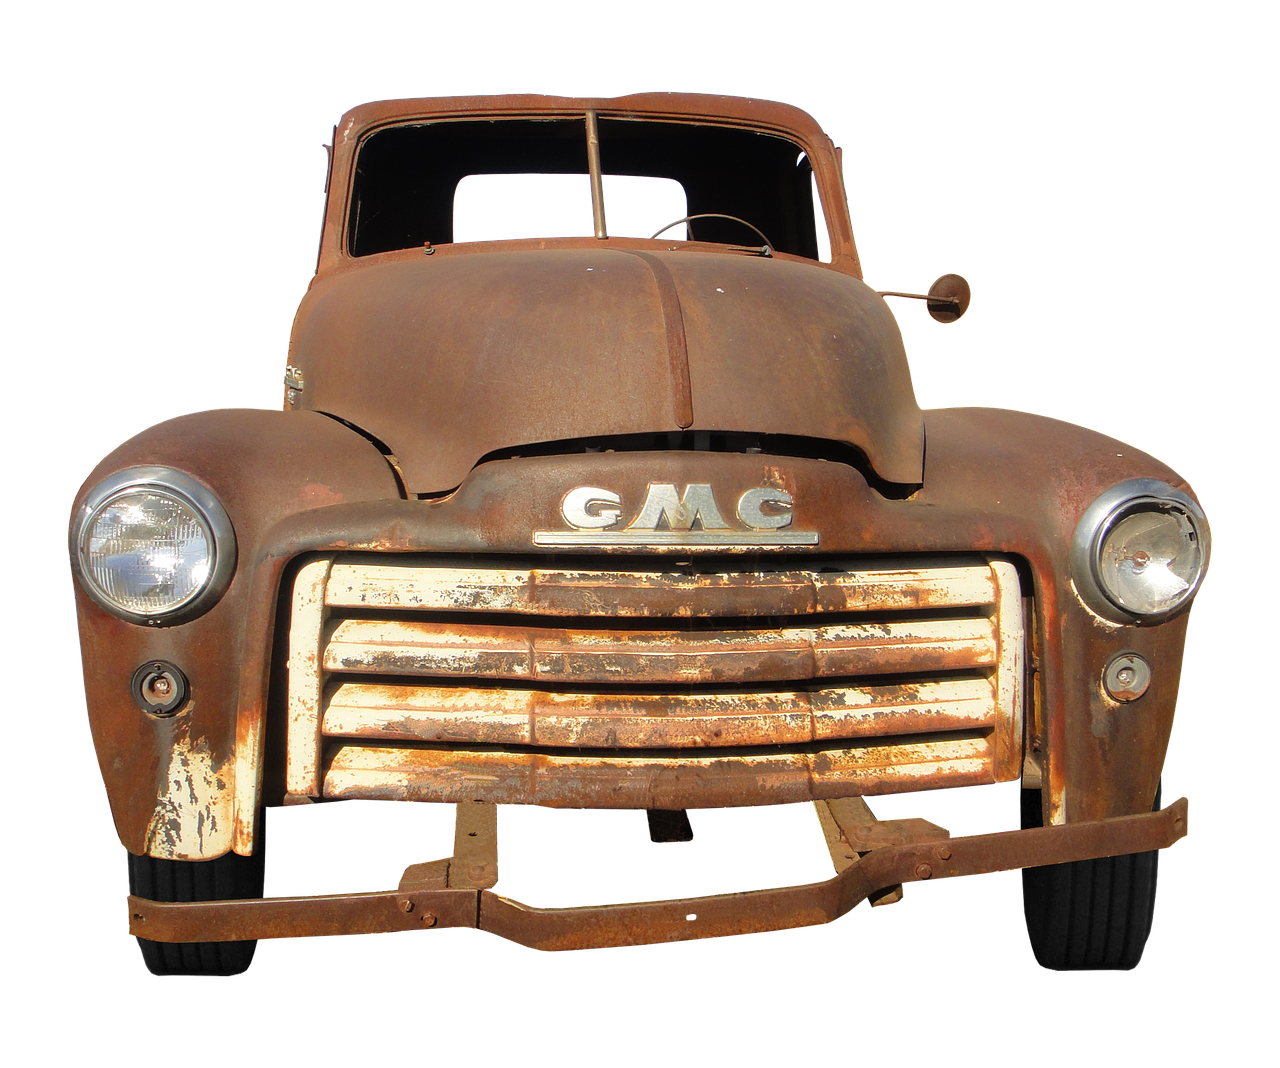 gmc oldtimer rusted free photo